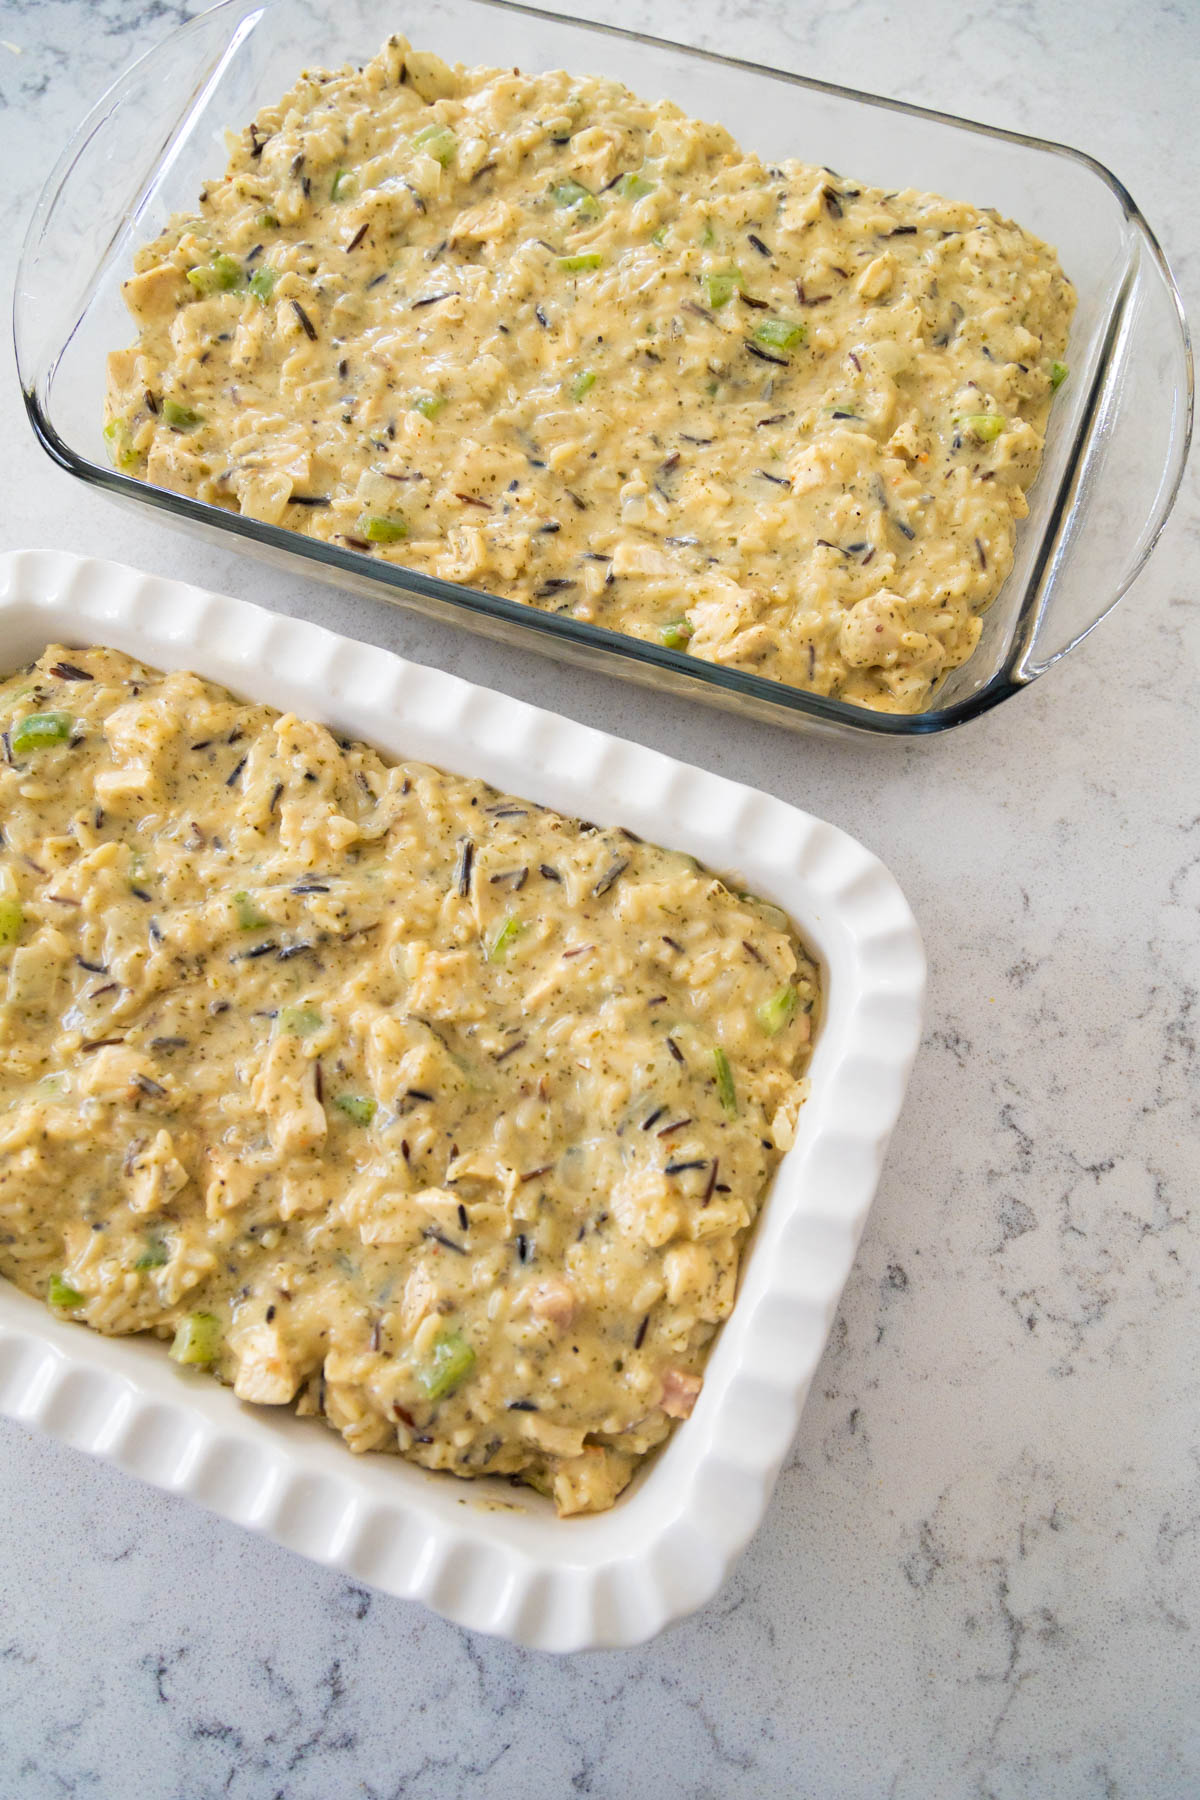 The chicken wild rice casserole has been split into two baking dishes, one to bake now and one to freeze.